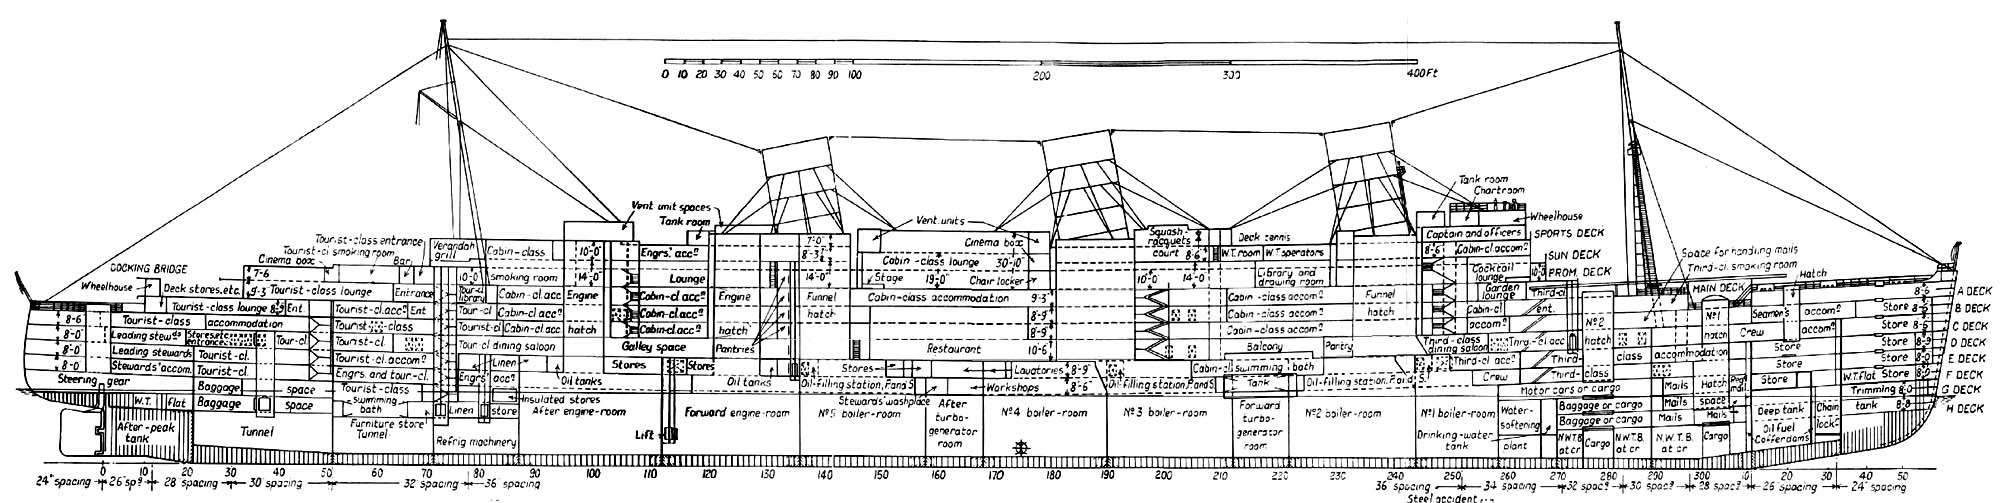 RMS Queen Mary Deck Plans